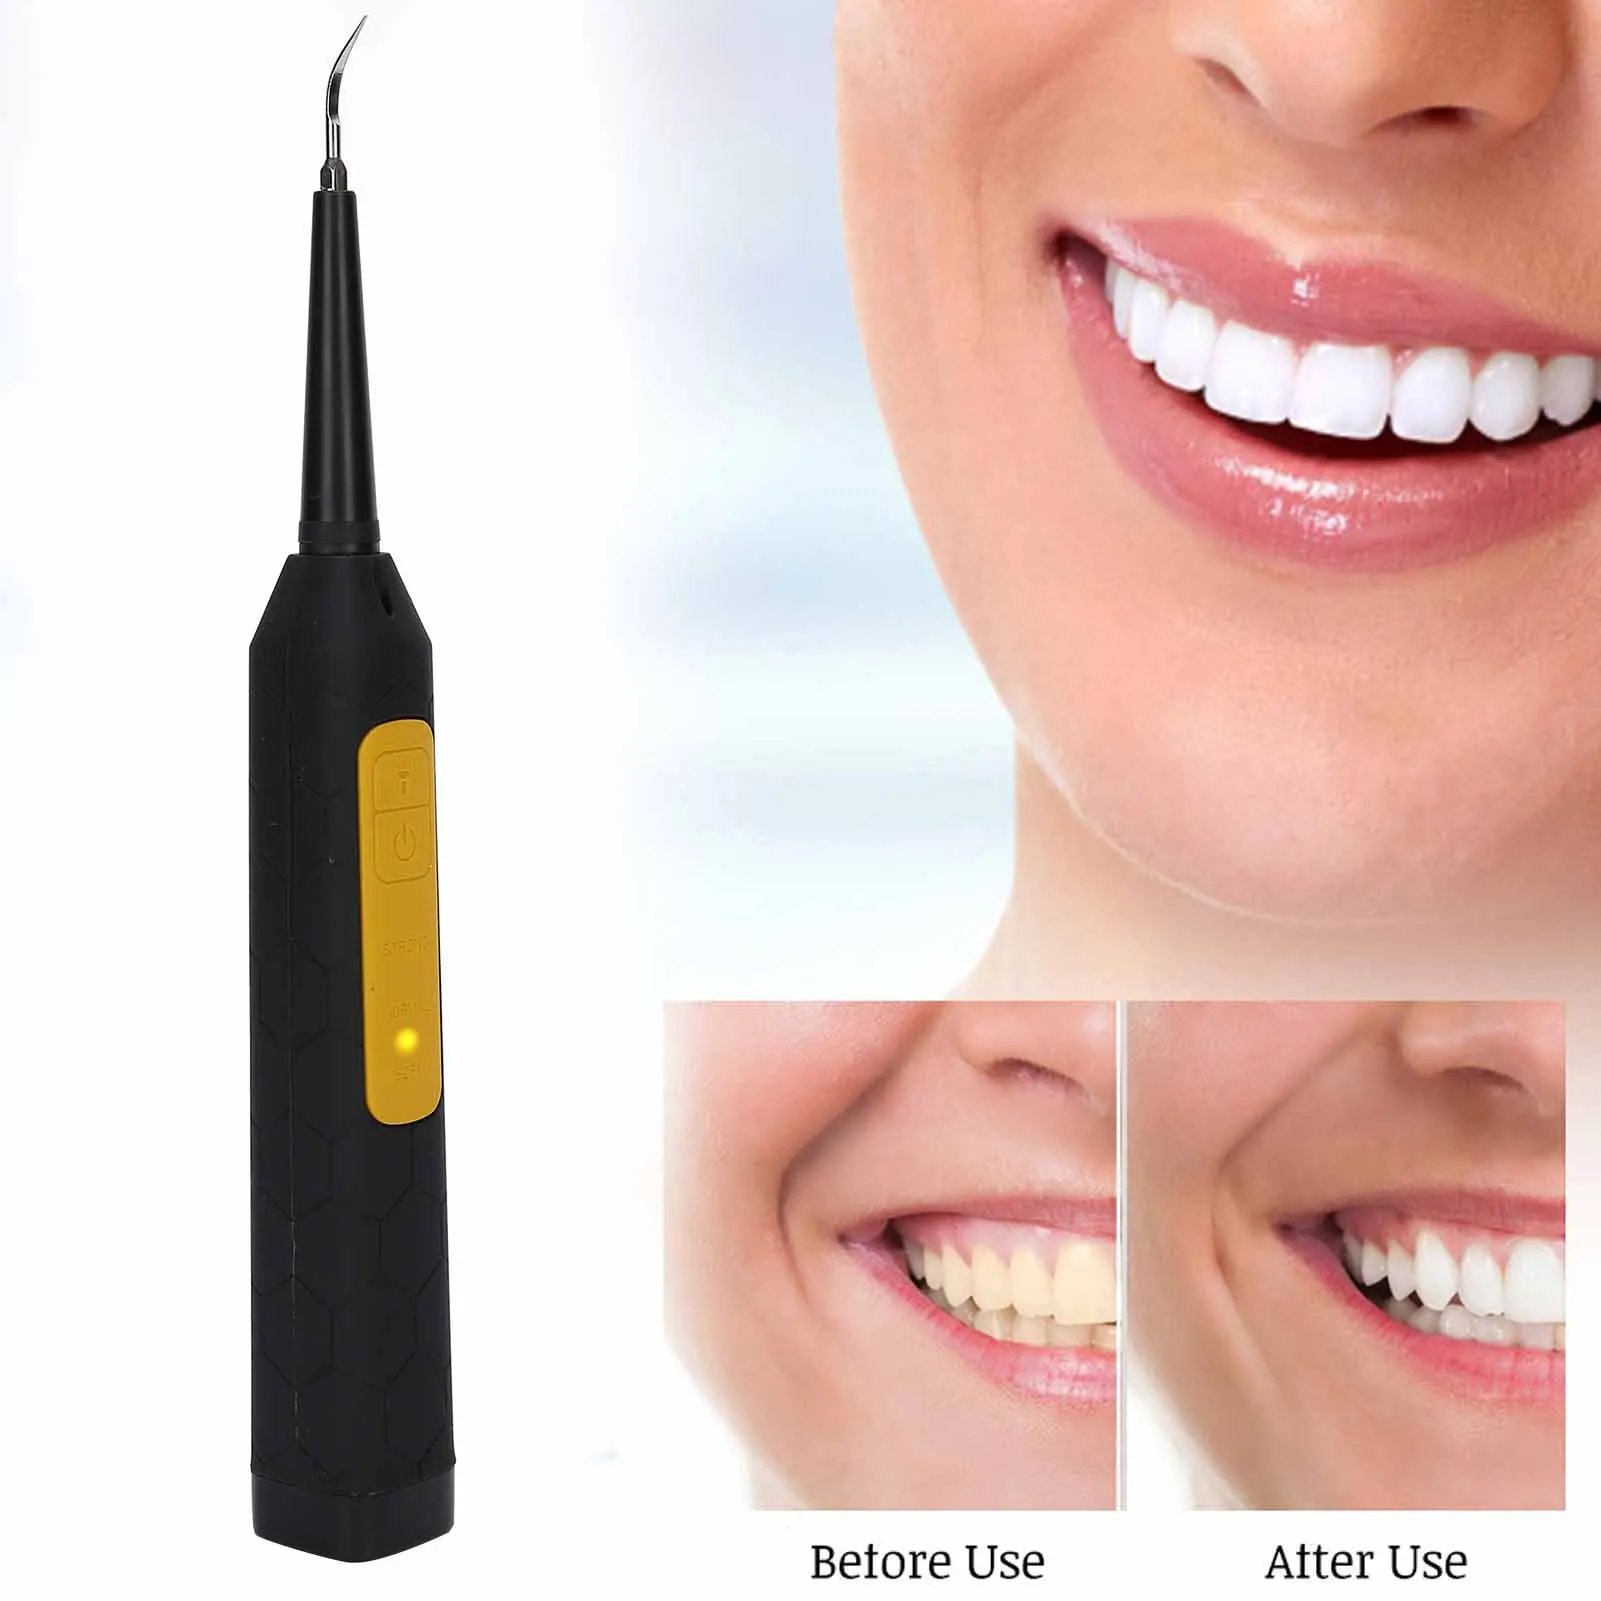 HighQuality Stainless Steel Head Tooth Cleaner Electric Calculus Remover Portable Teeth Tartar Remover Oral Care Tool USB Charg 1 2 4pcs 4 points 08b sprocket 10 to 60 teeth craft hole 45 steel tooth surface quenching pitch 12 7mm can be customized